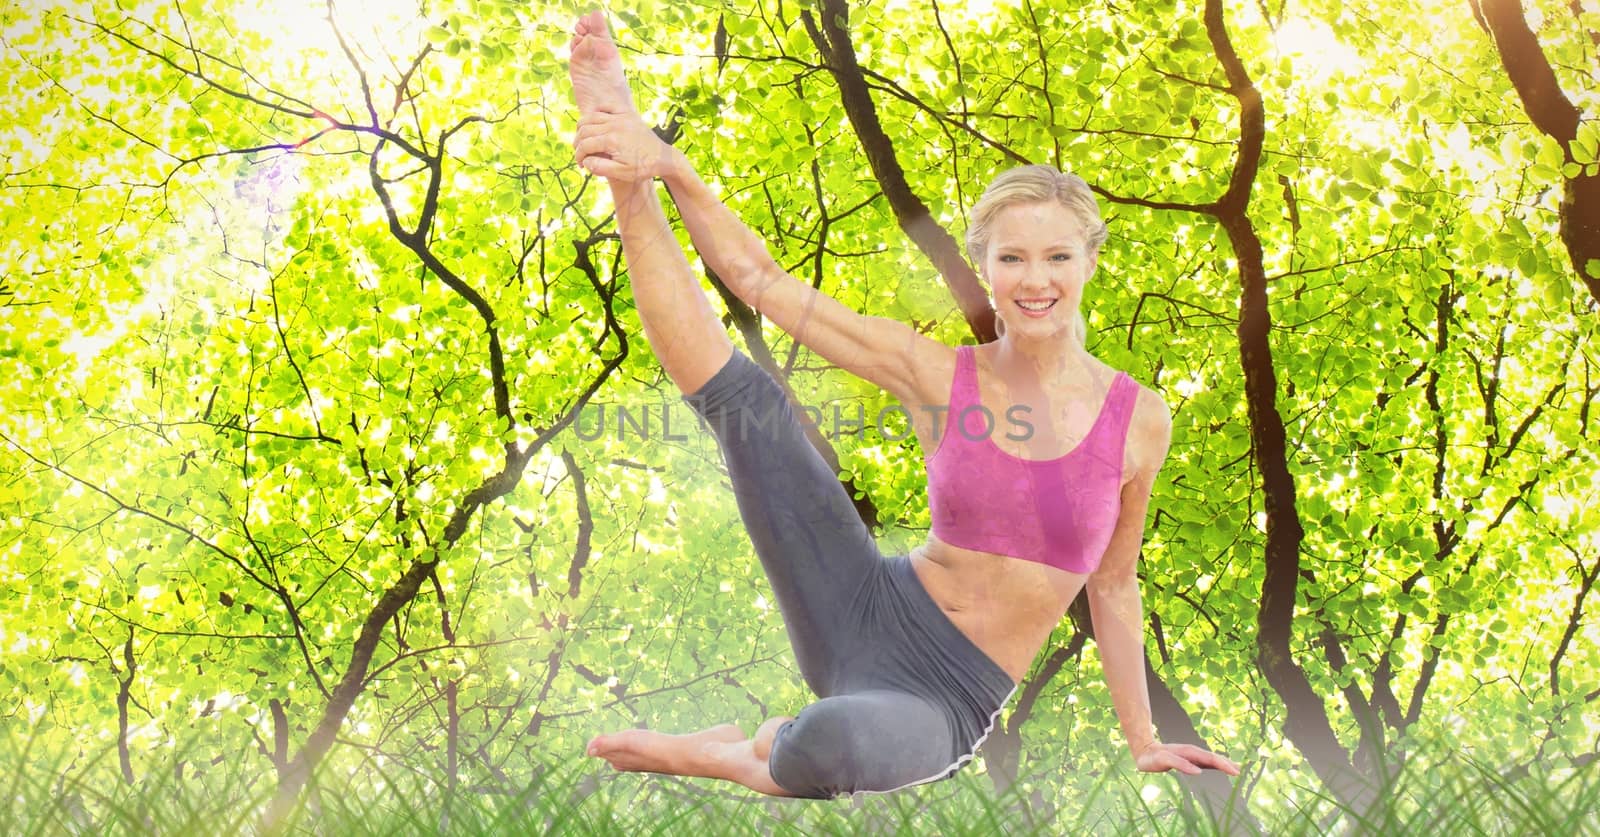 Digital composite of Double exposure of woman performing yoga in forest